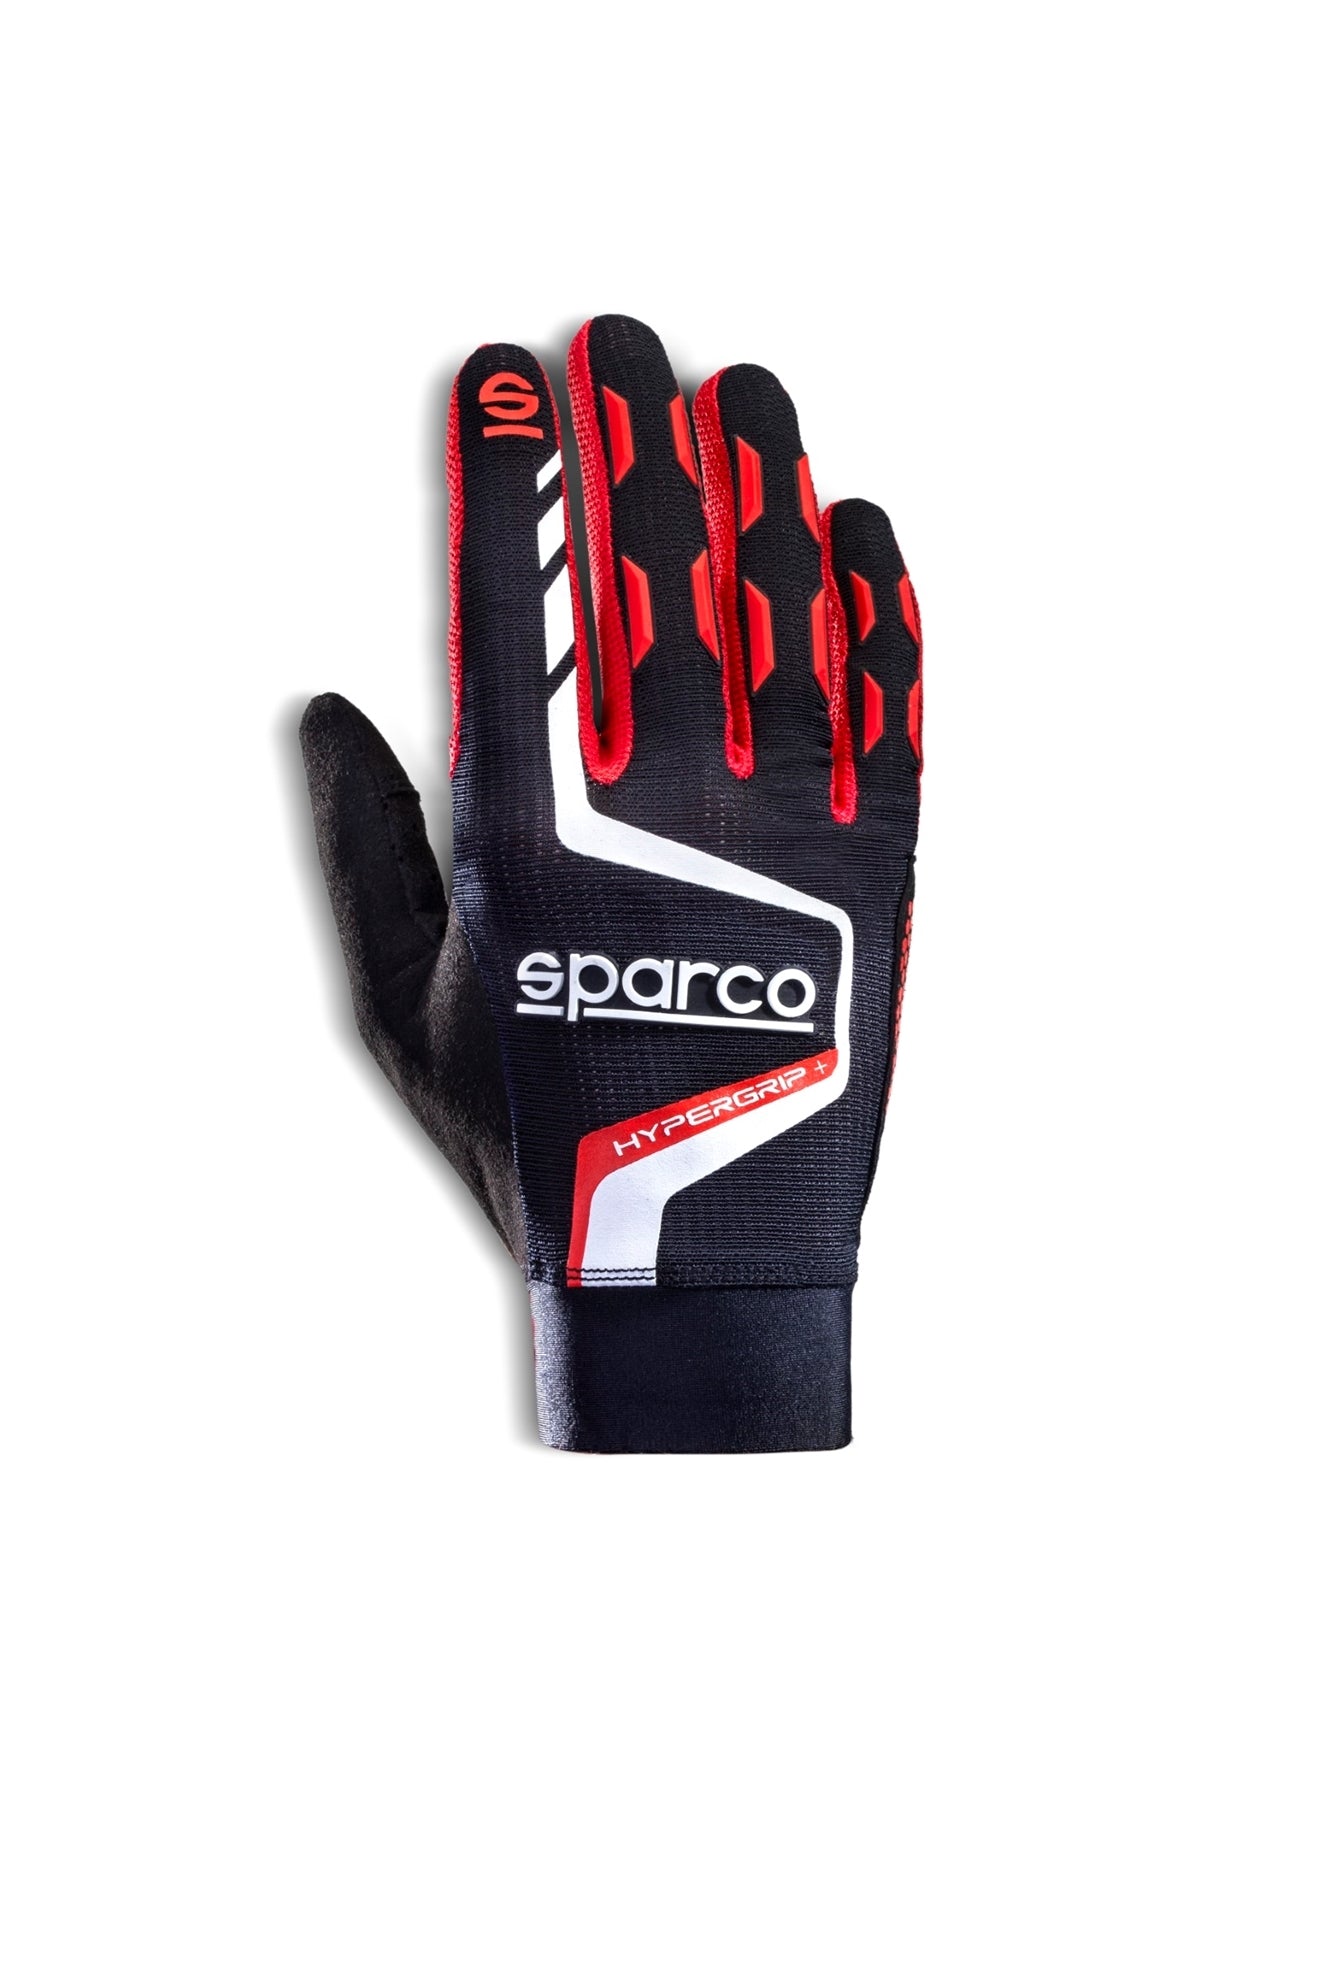 Solo Performance Specialties Sparco Hypergrip + Non SFI Gaming Gloves Perfect for Autocross